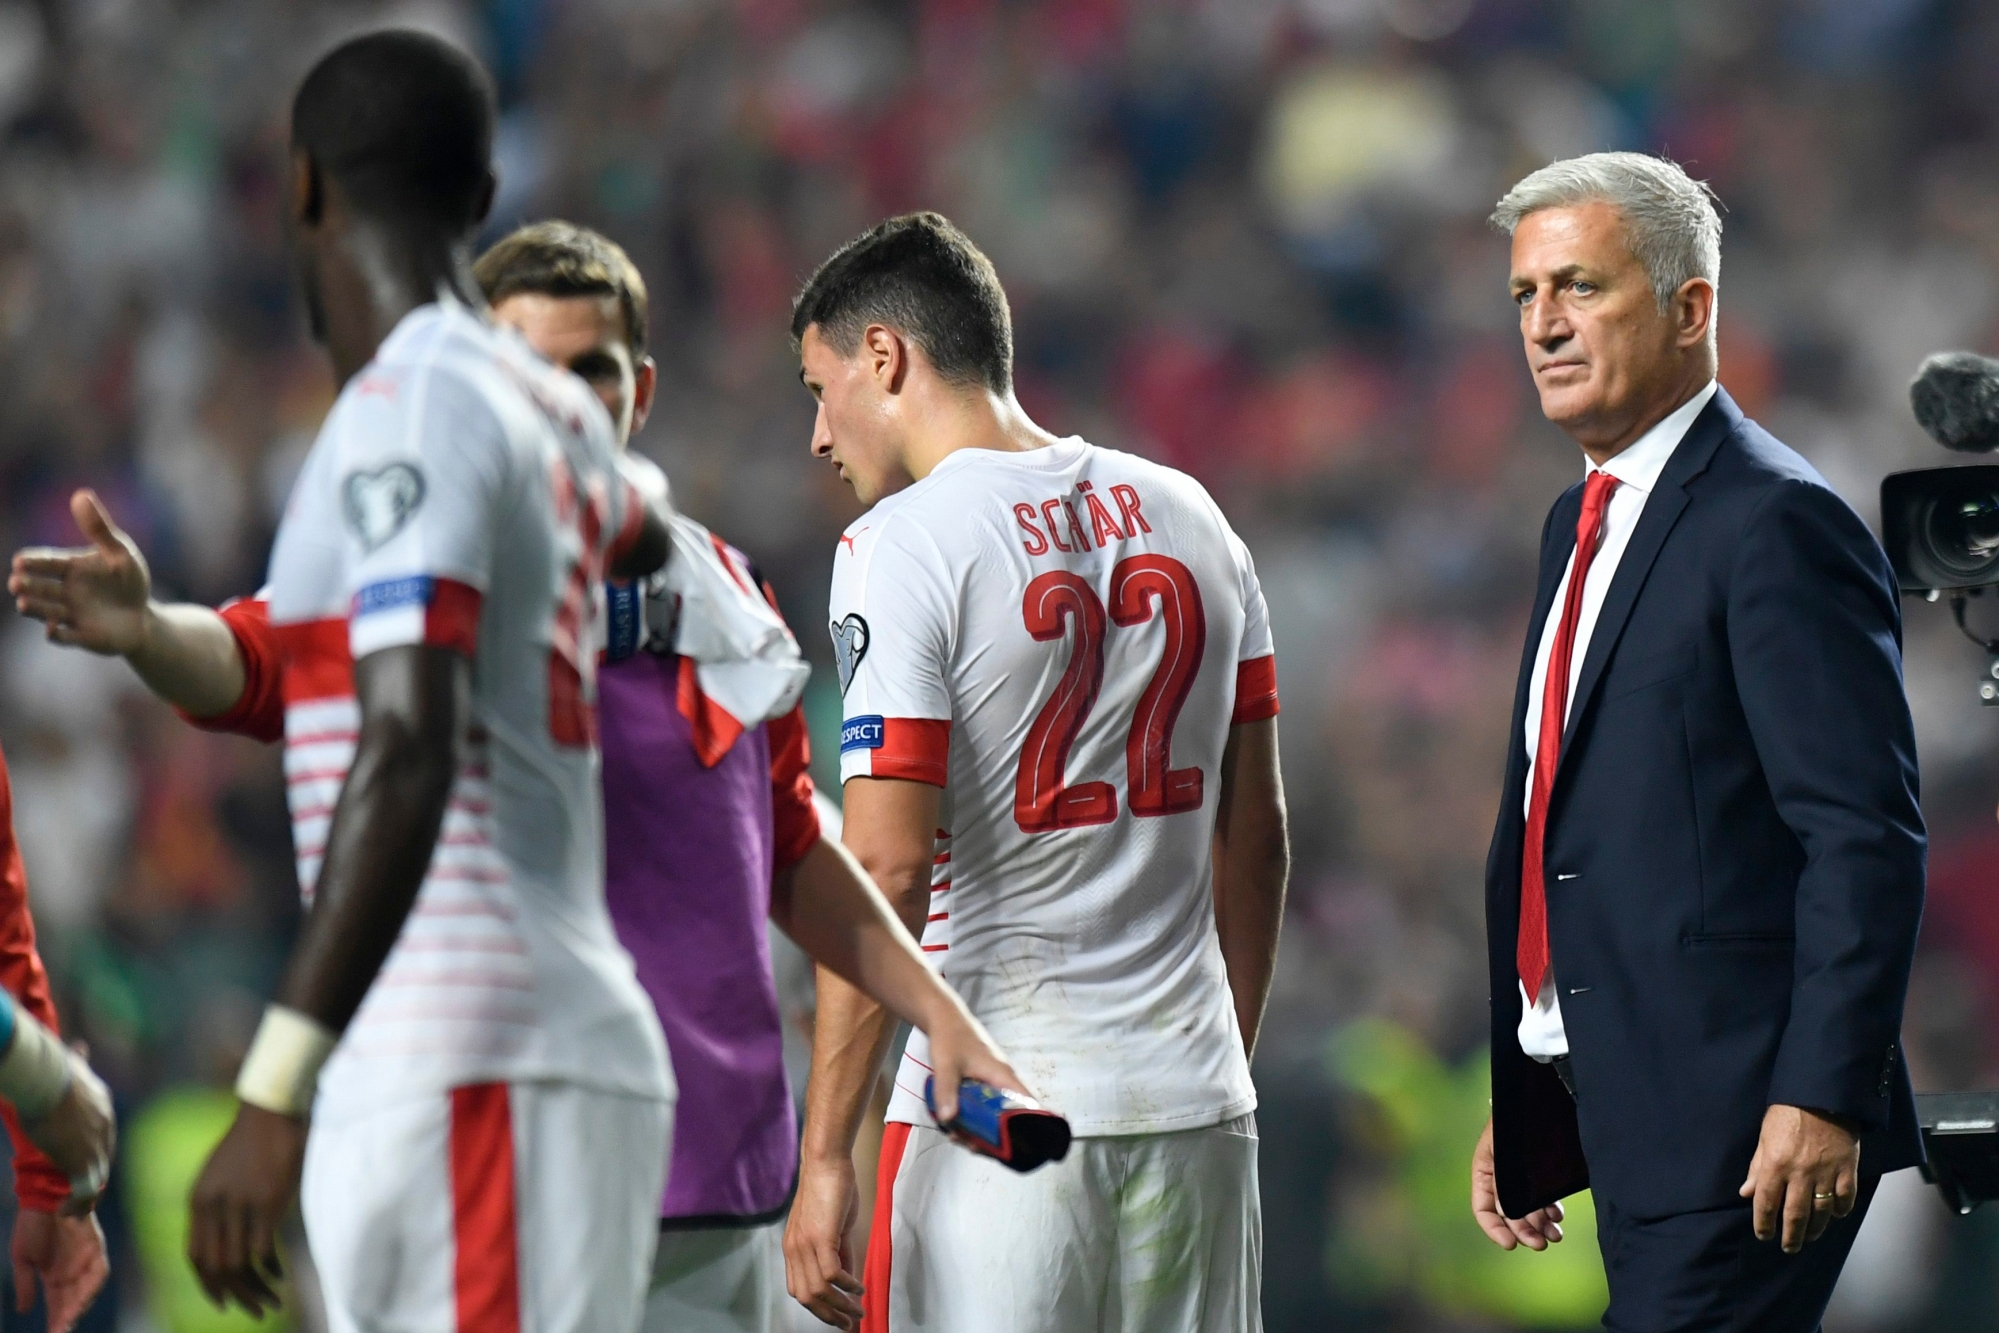 Switzerland's head coach Vladimir Petkovic shows dejection after the 2018 Fifa World Cup Russia group B qualification soccer match between Portugal and Switzerland at the Estadio da Luz stadium, in Lisbon, Portugal, Tuesday, October 10, 2017. (KEYSTONE/Laurent Gillieron) PORTUGAL SOCCER FIFA WORLD CUP 2018 QUALIFICATION PORTUGAL SWITZERLAND